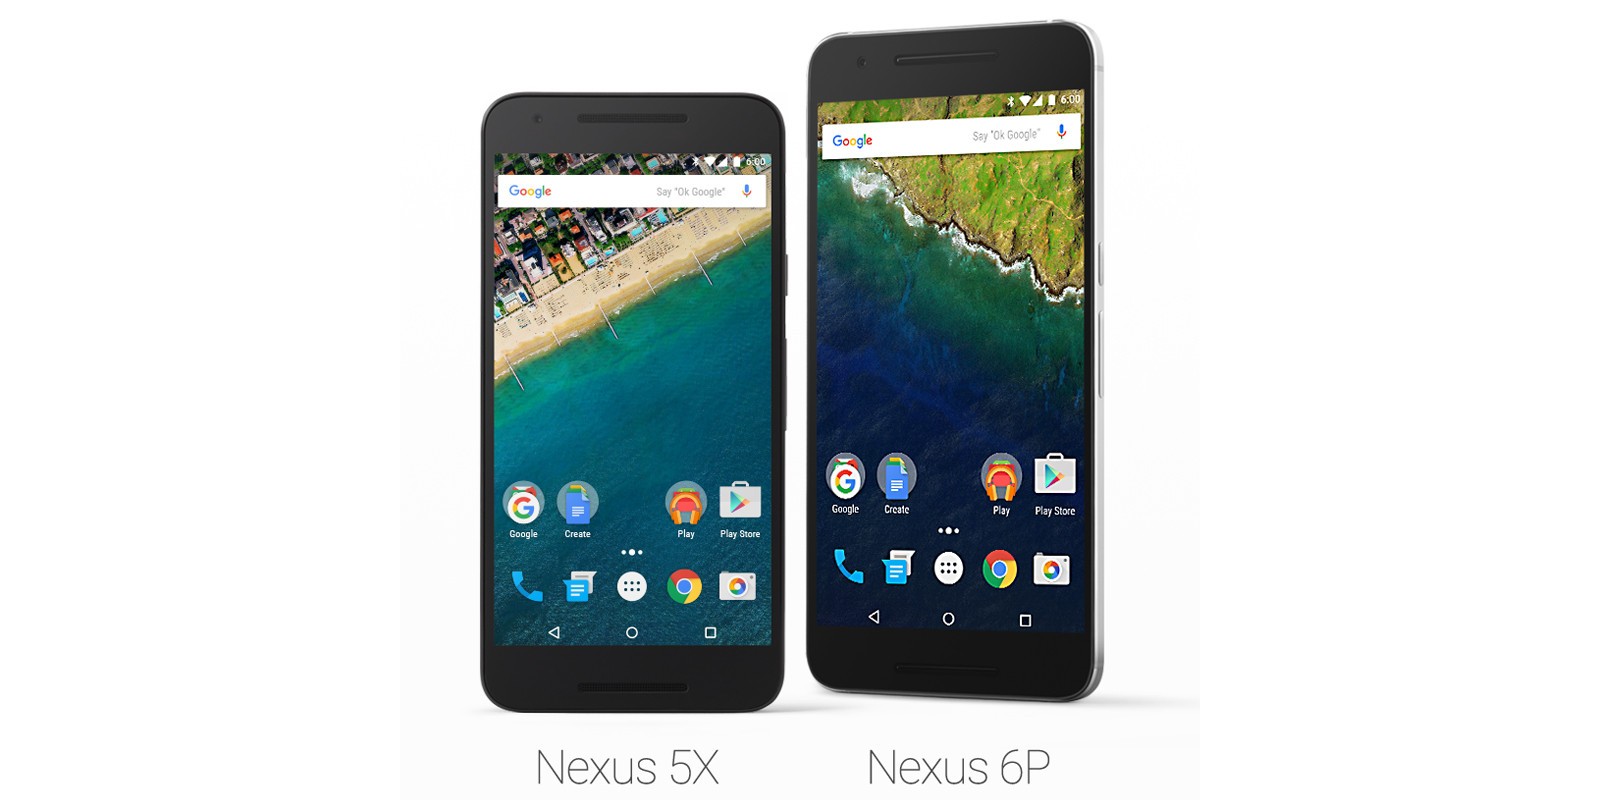 Google Launches Nexus 5x And 6p In India With Great Promotion